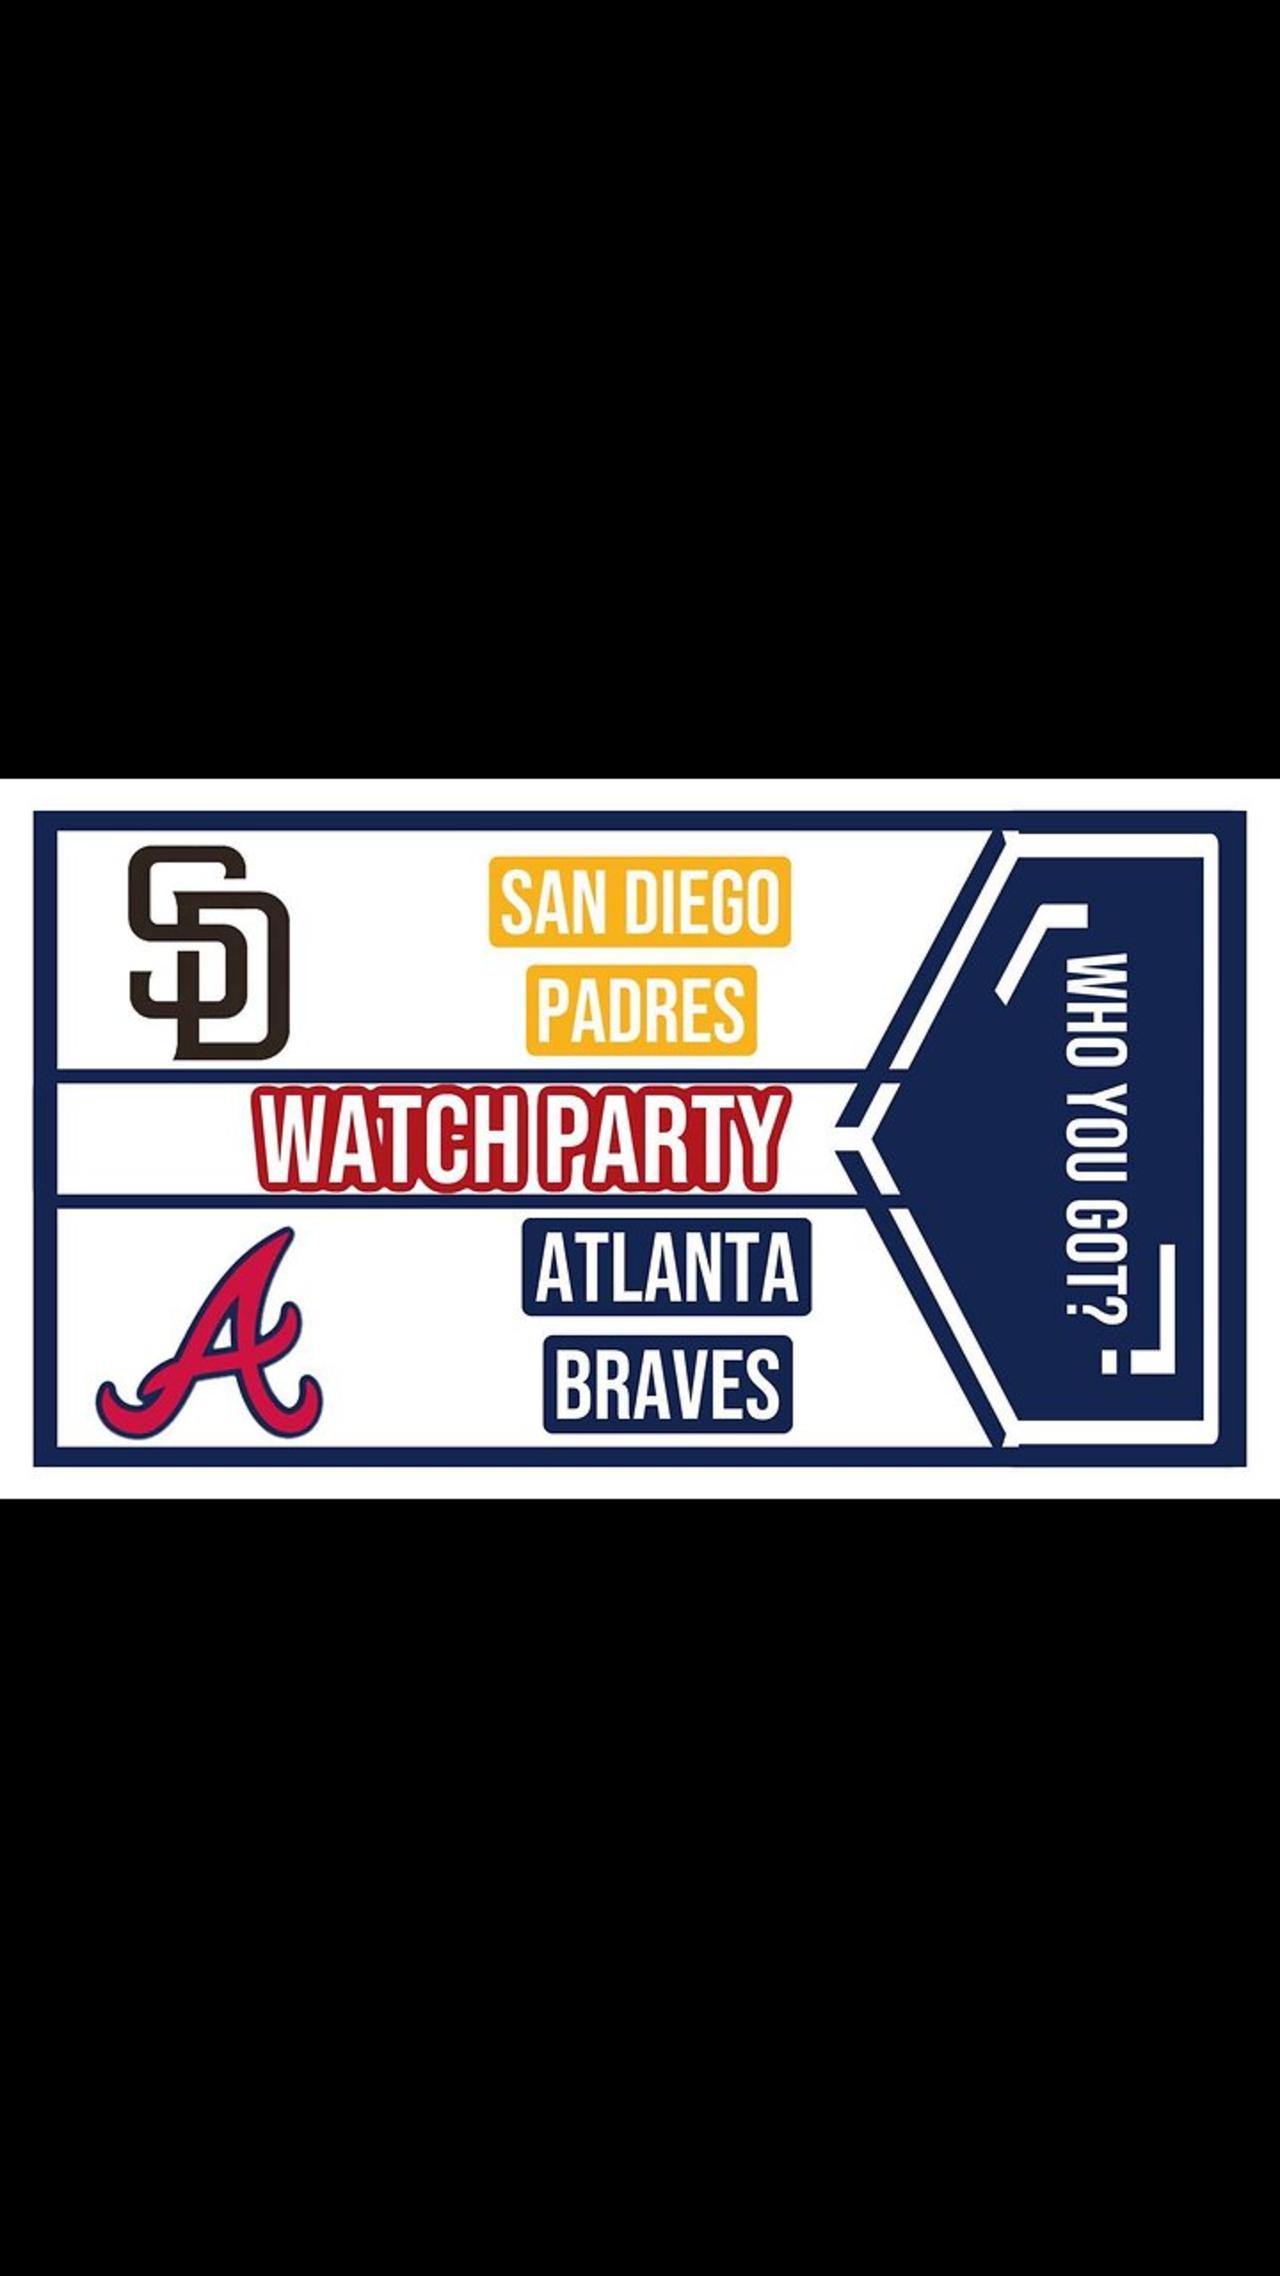 Join The Excitement: Atlanta Braves vs San Diego Padres Game 1 Live Watch Party